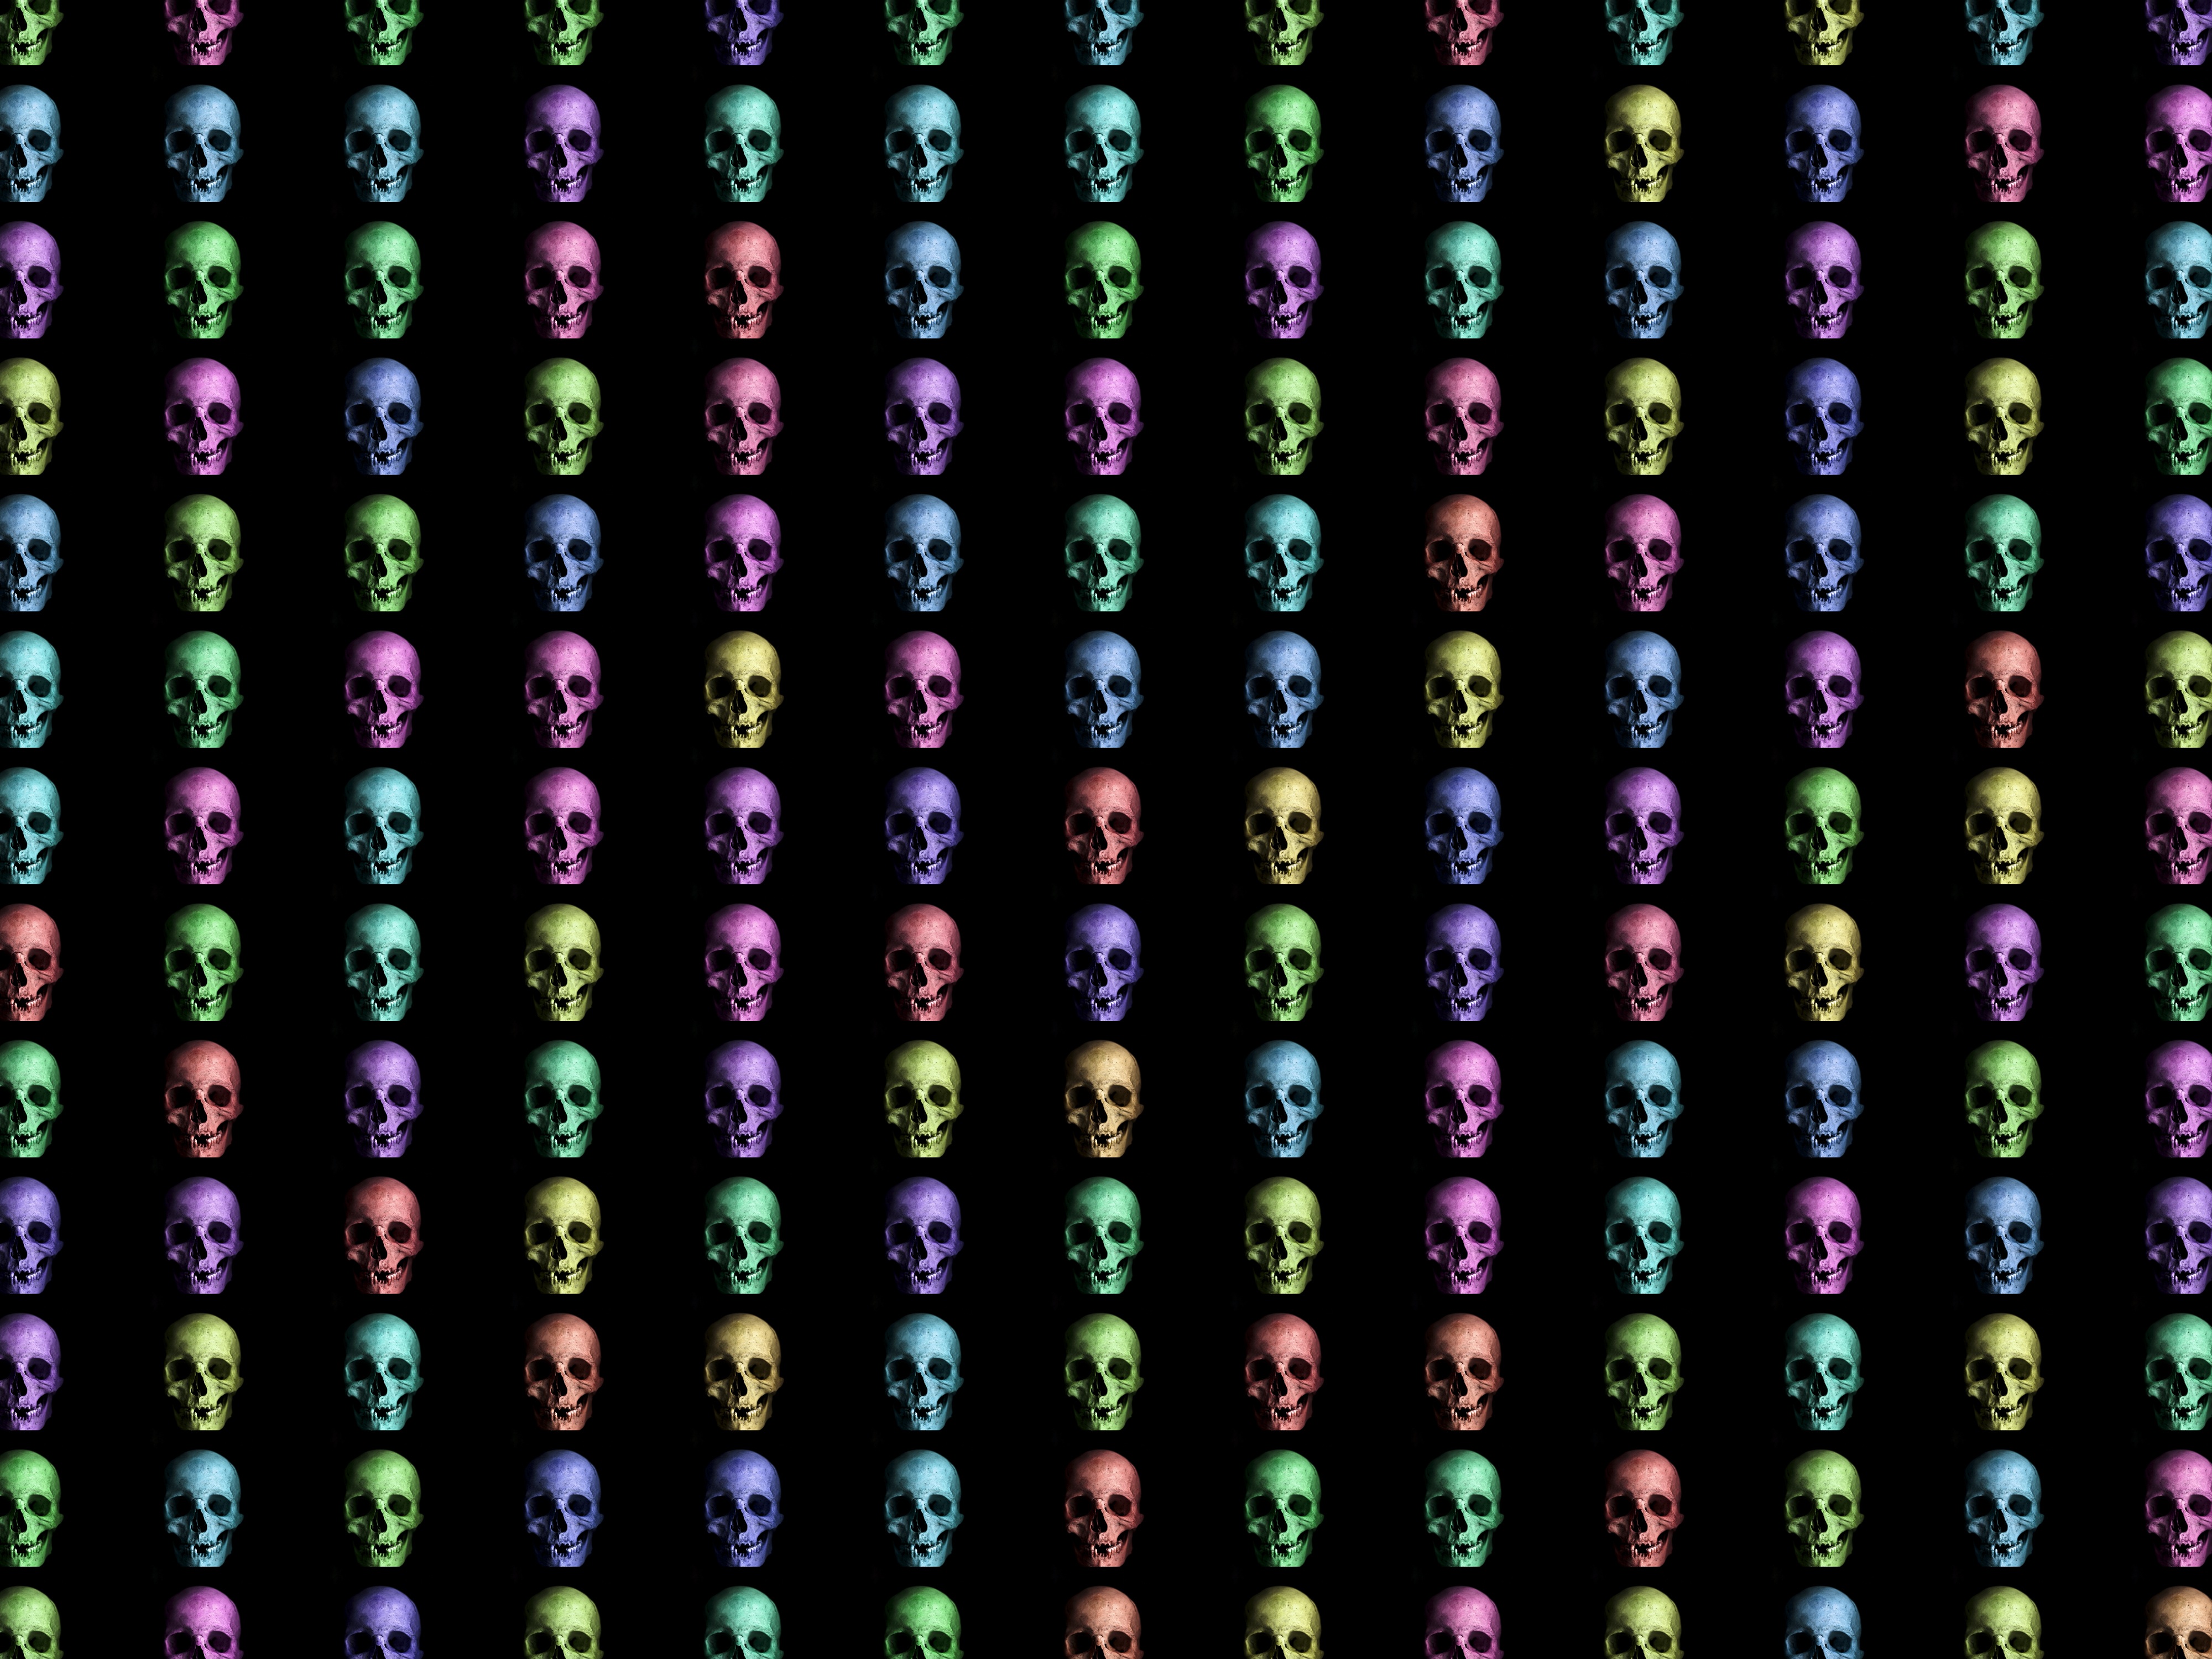 123054 download wallpaper skull, multicolored, motley, texture, textures, skulls screensavers and pictures for free